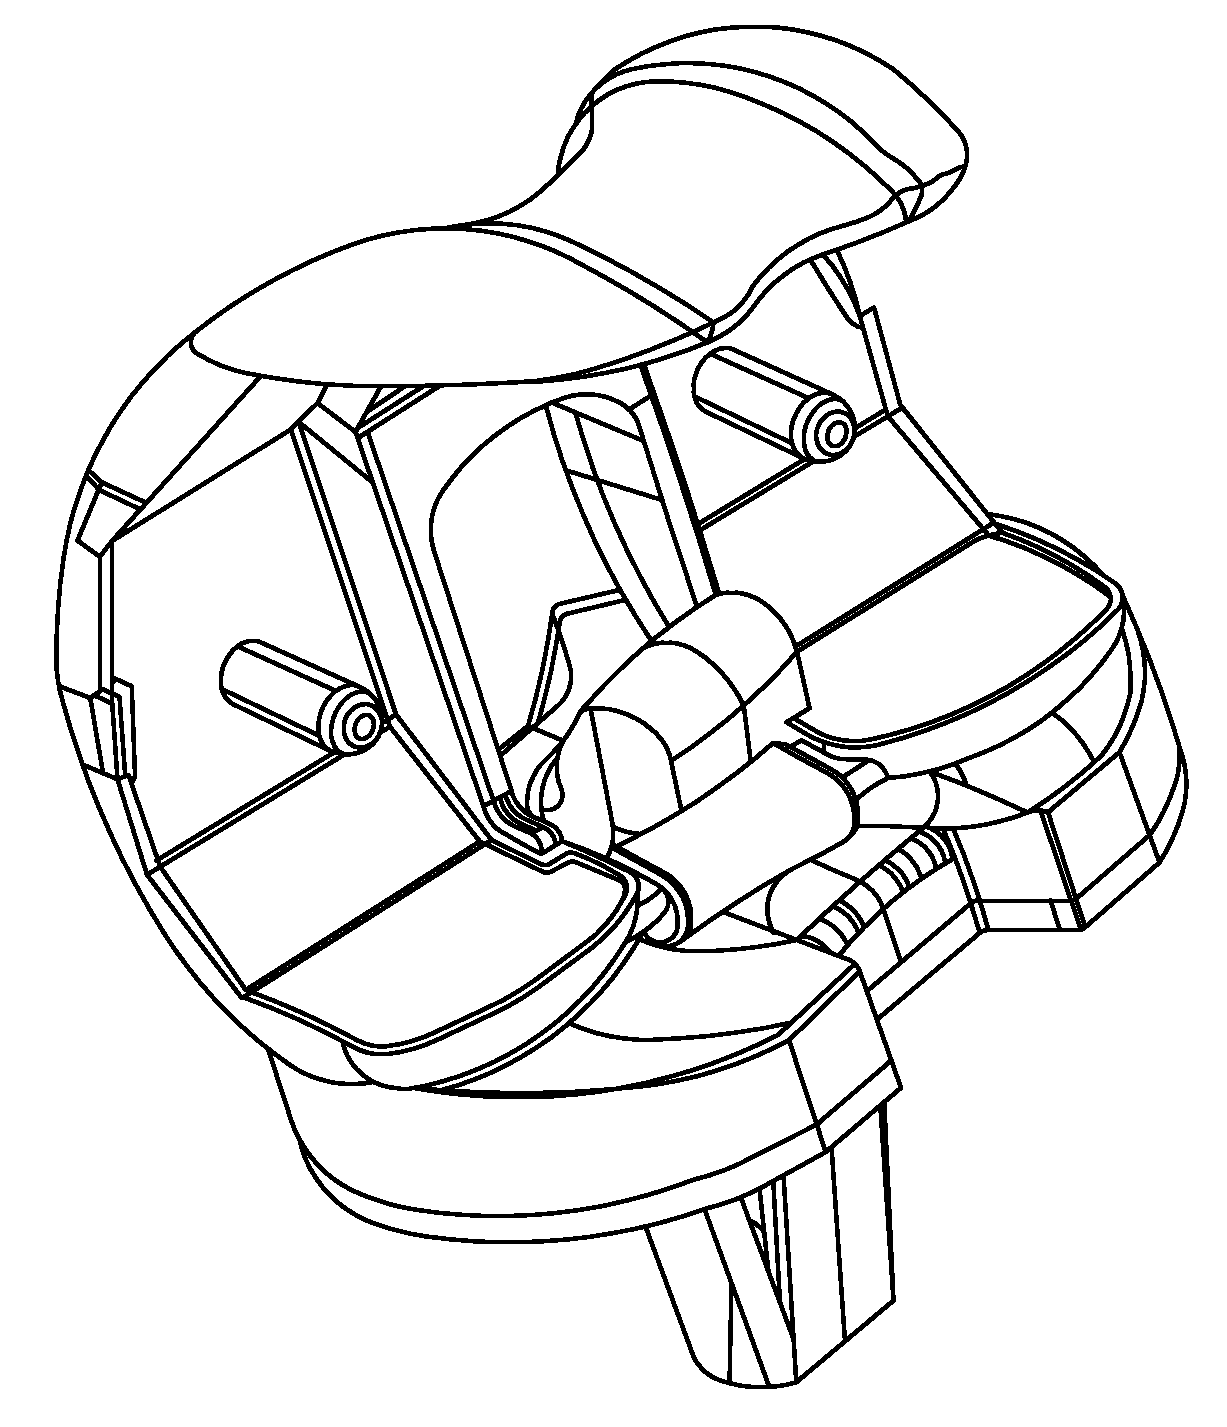 Total Knee Replacement Prosthesis With High Order NURBS Surfaces